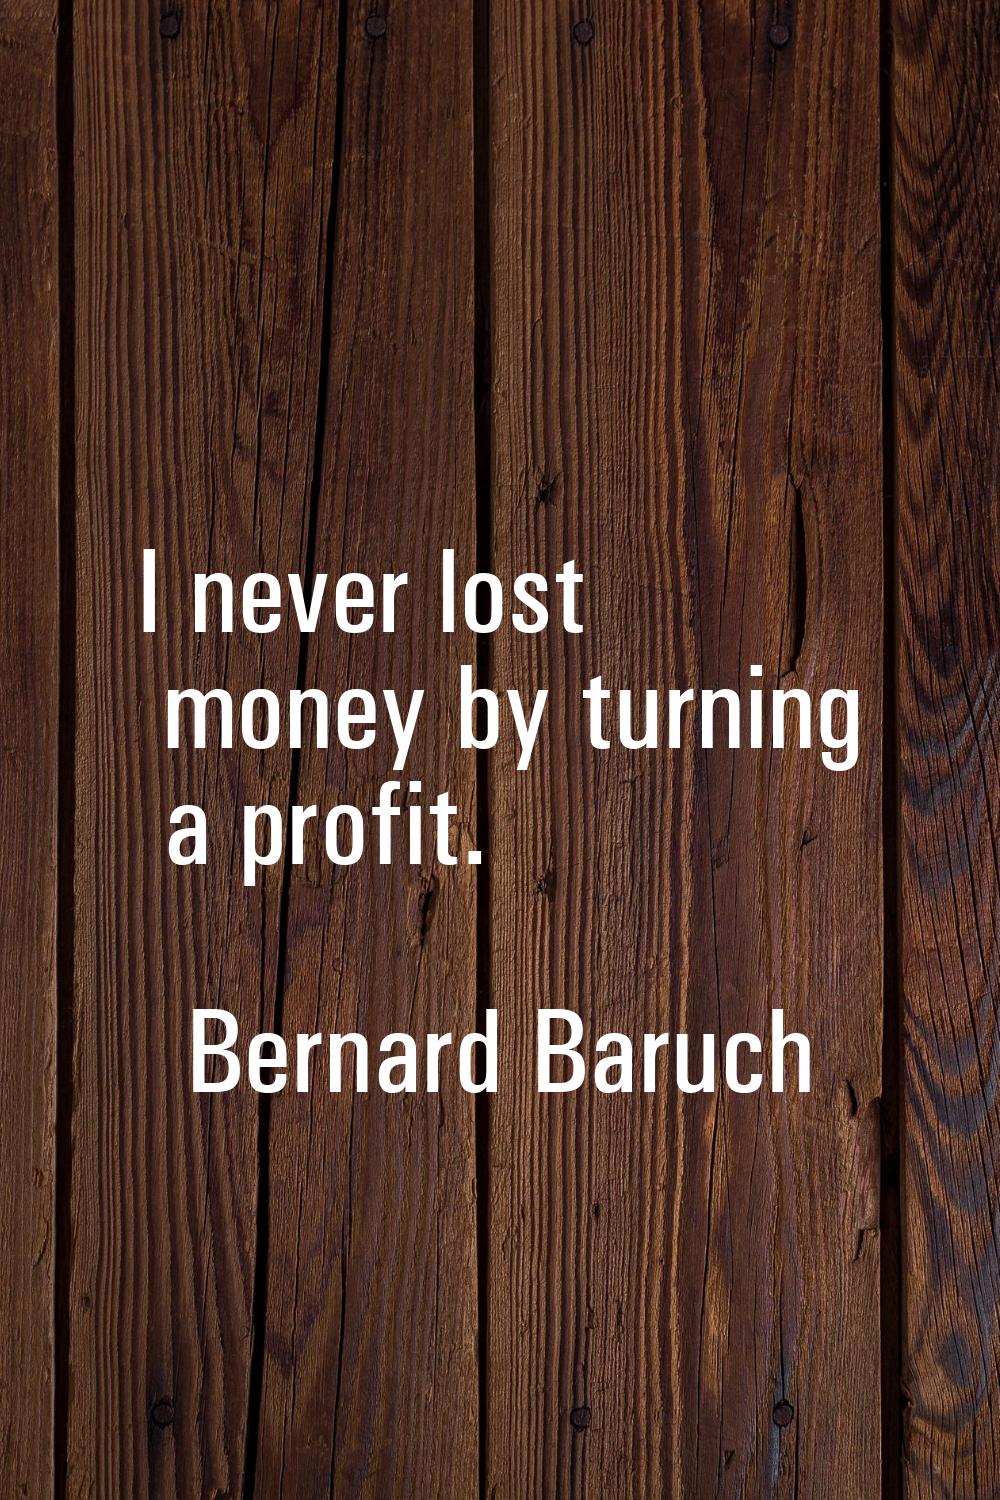 I never lost money by turning a profit.